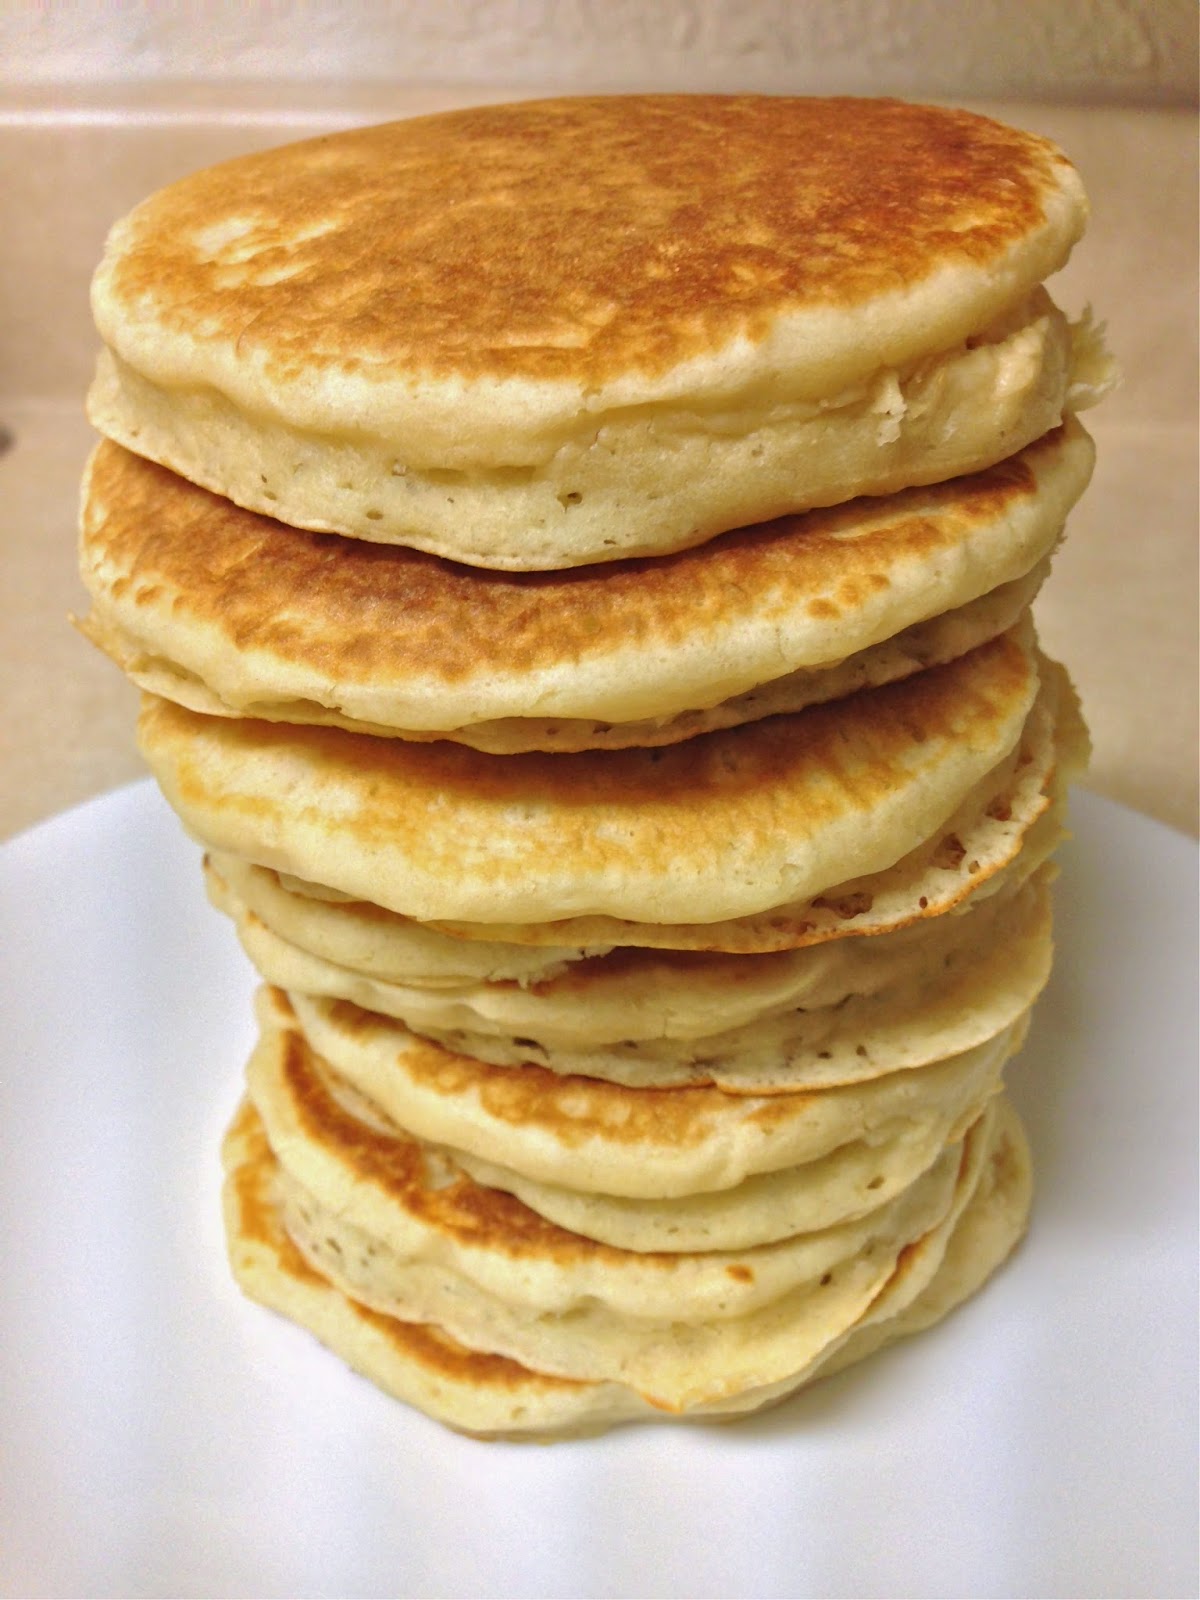 ♥ Chelley in the Kitchen ♥: Fluffy Pancake Recipe